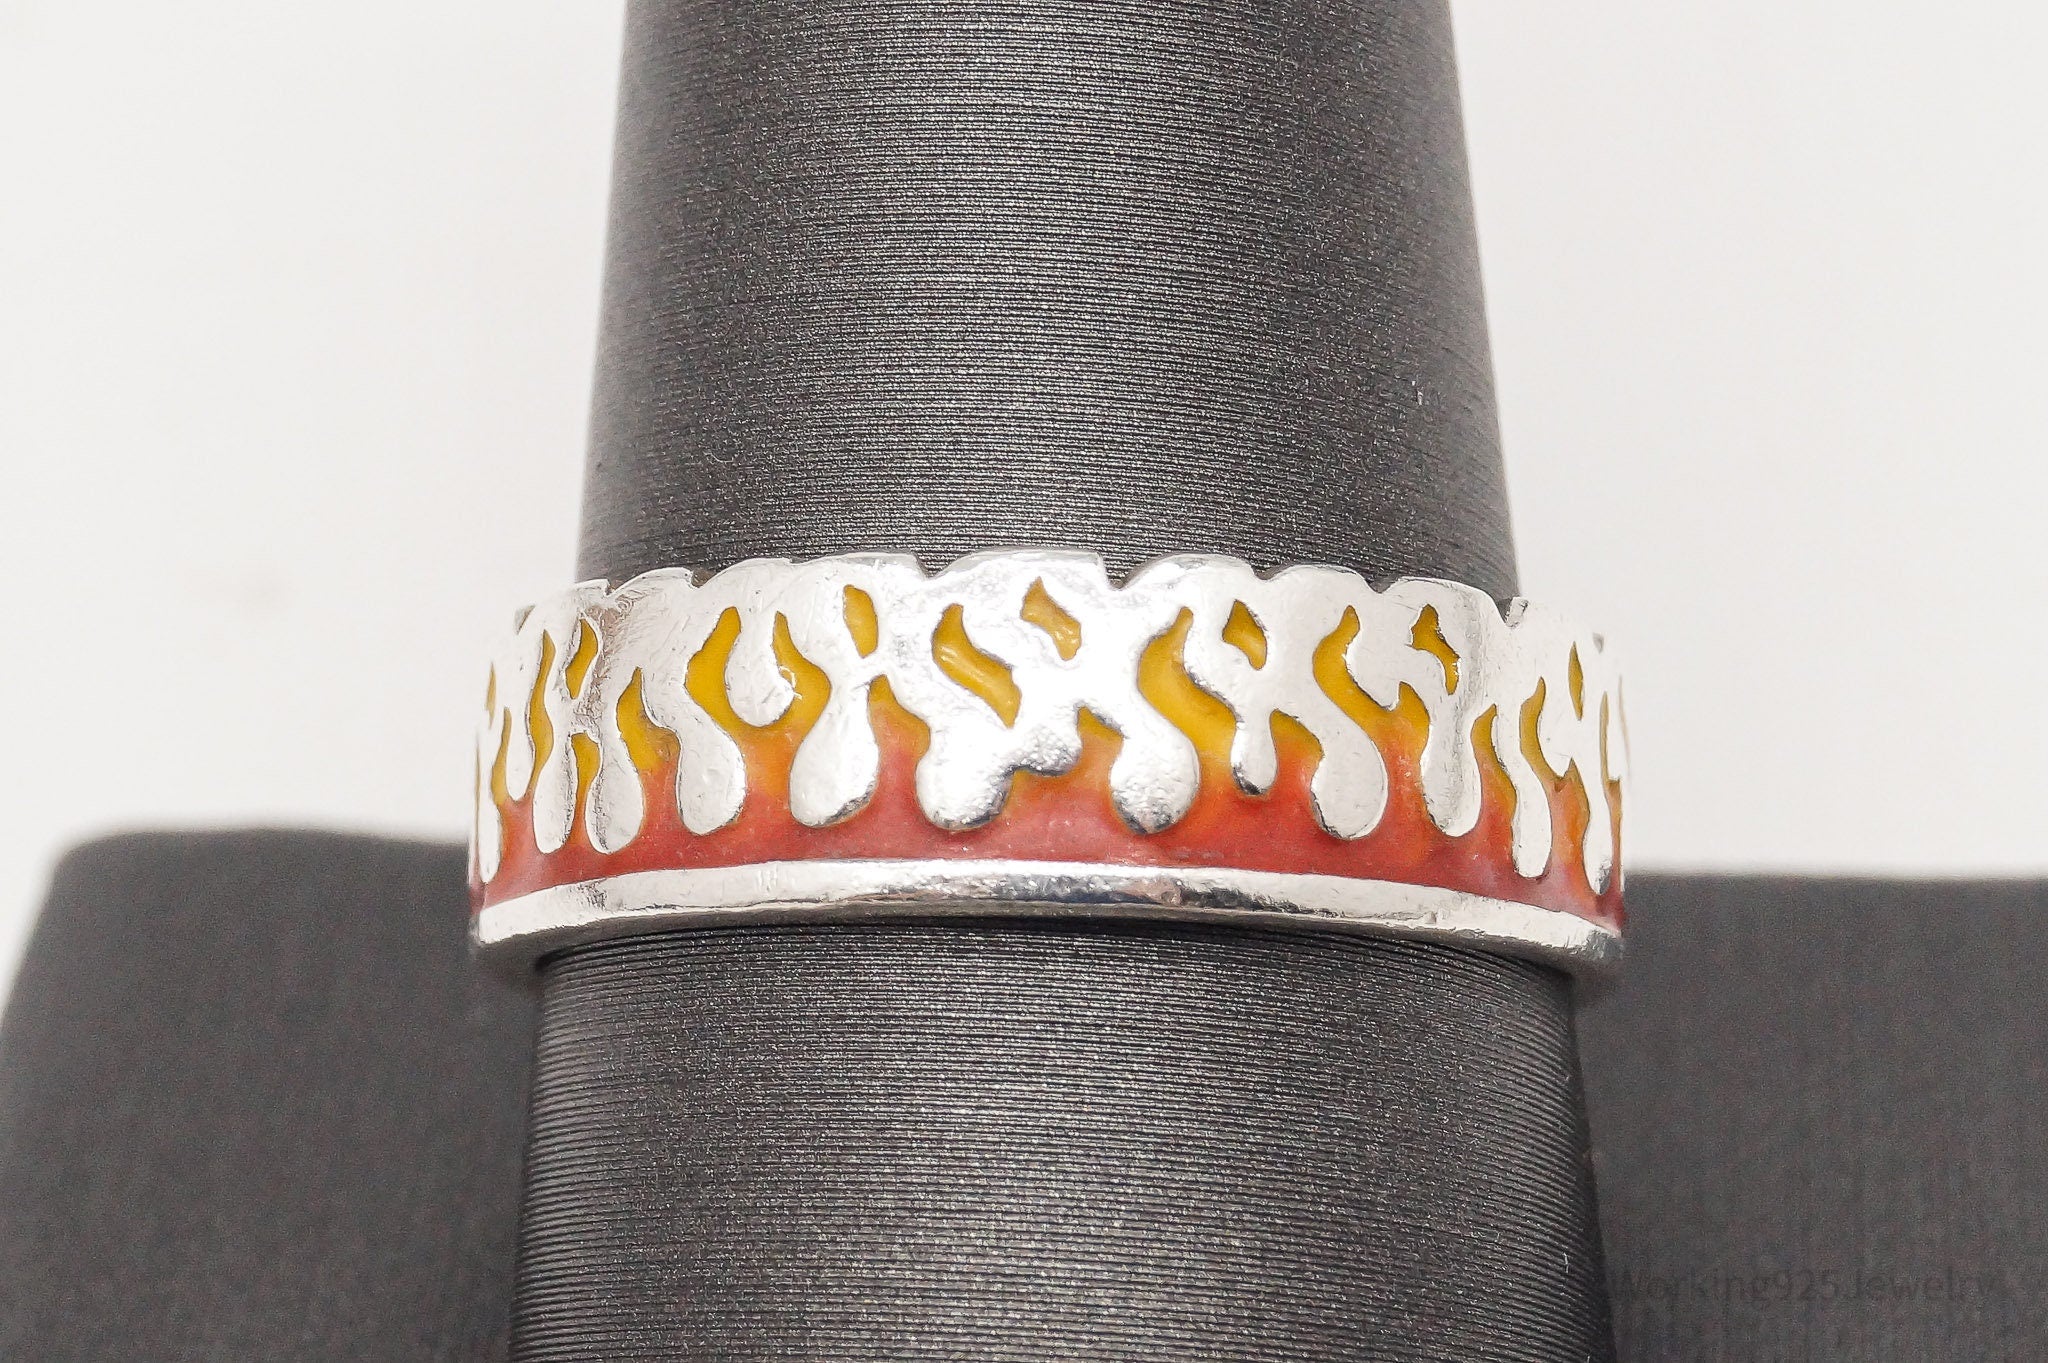 Vintage PSCL Fire Flames Enamel Sterling Silver Band Ring - Size 10.75